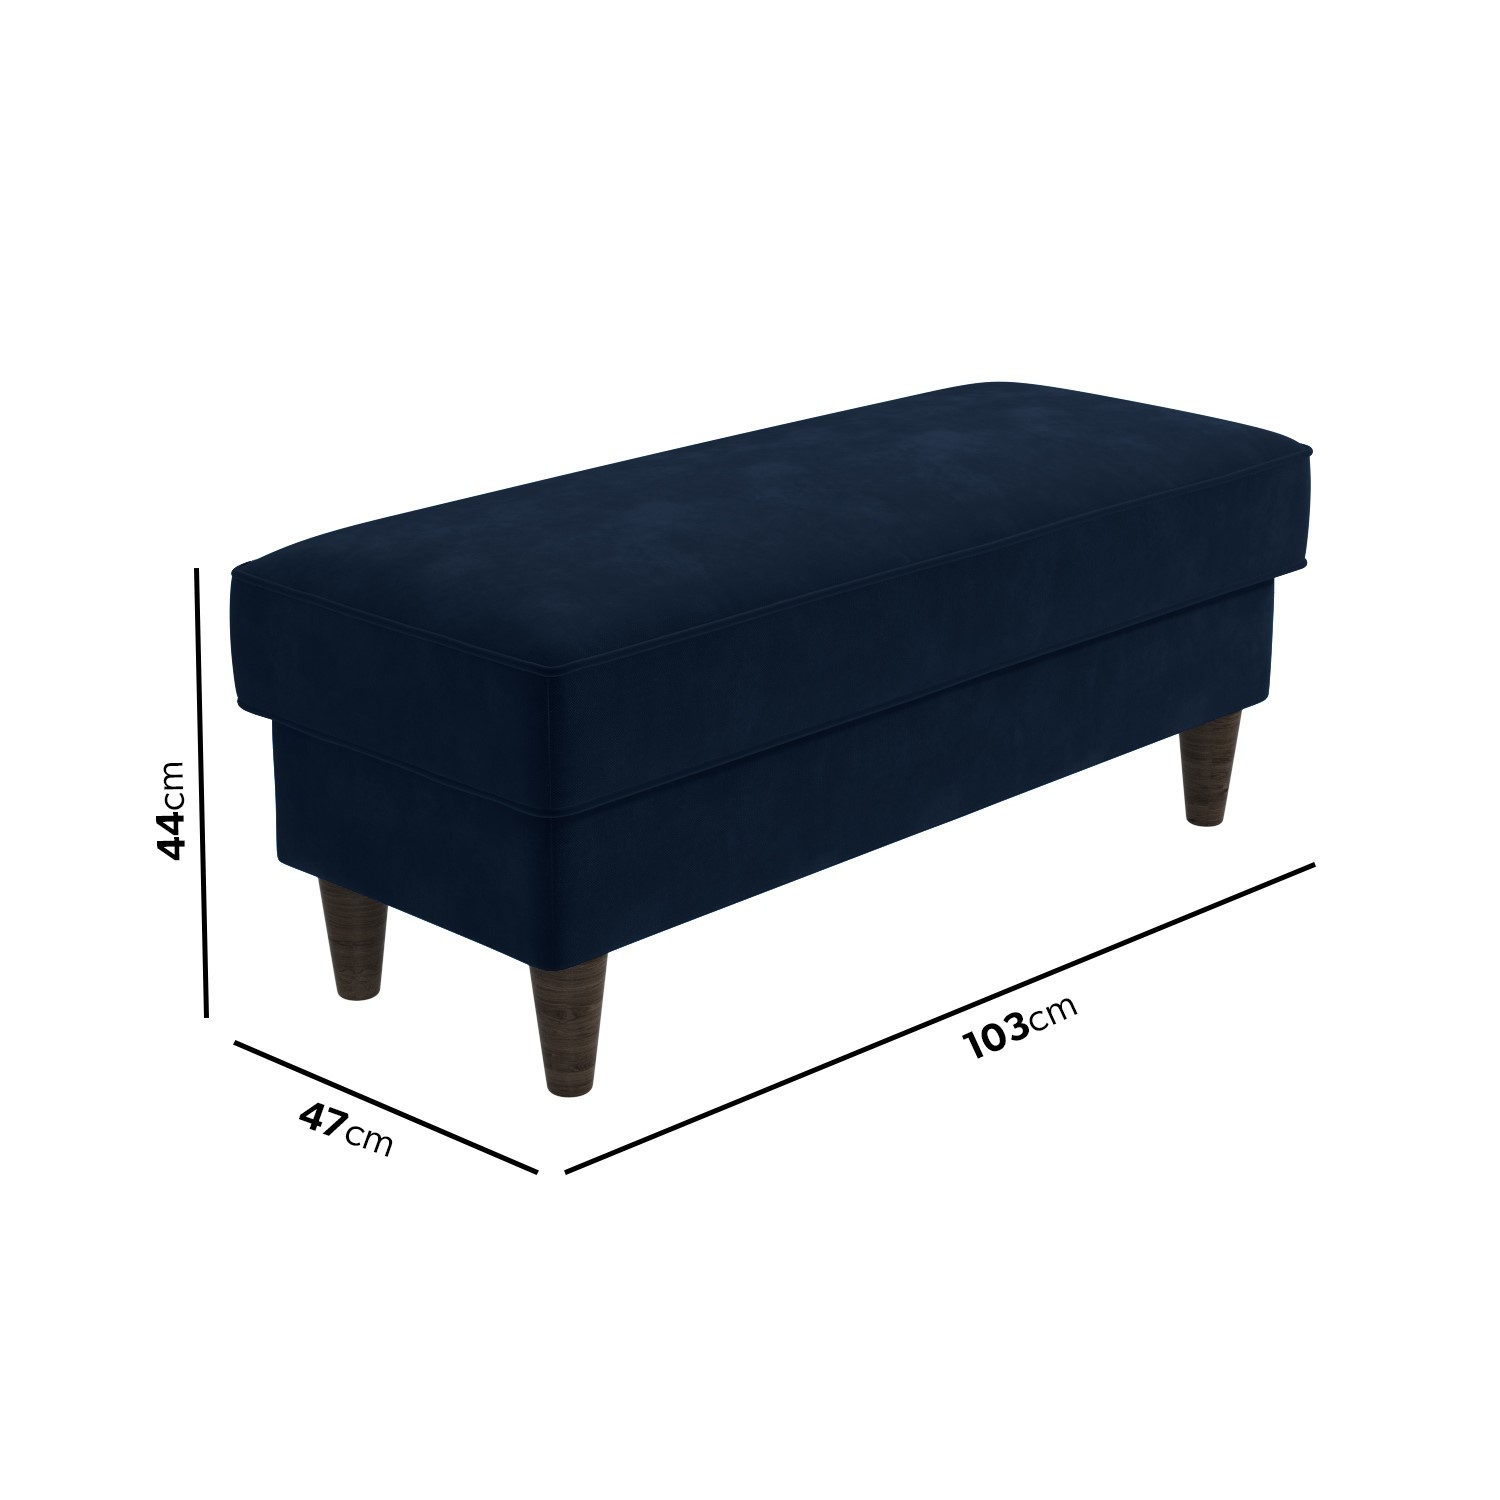 Read more about Large navy velvet footstool idris